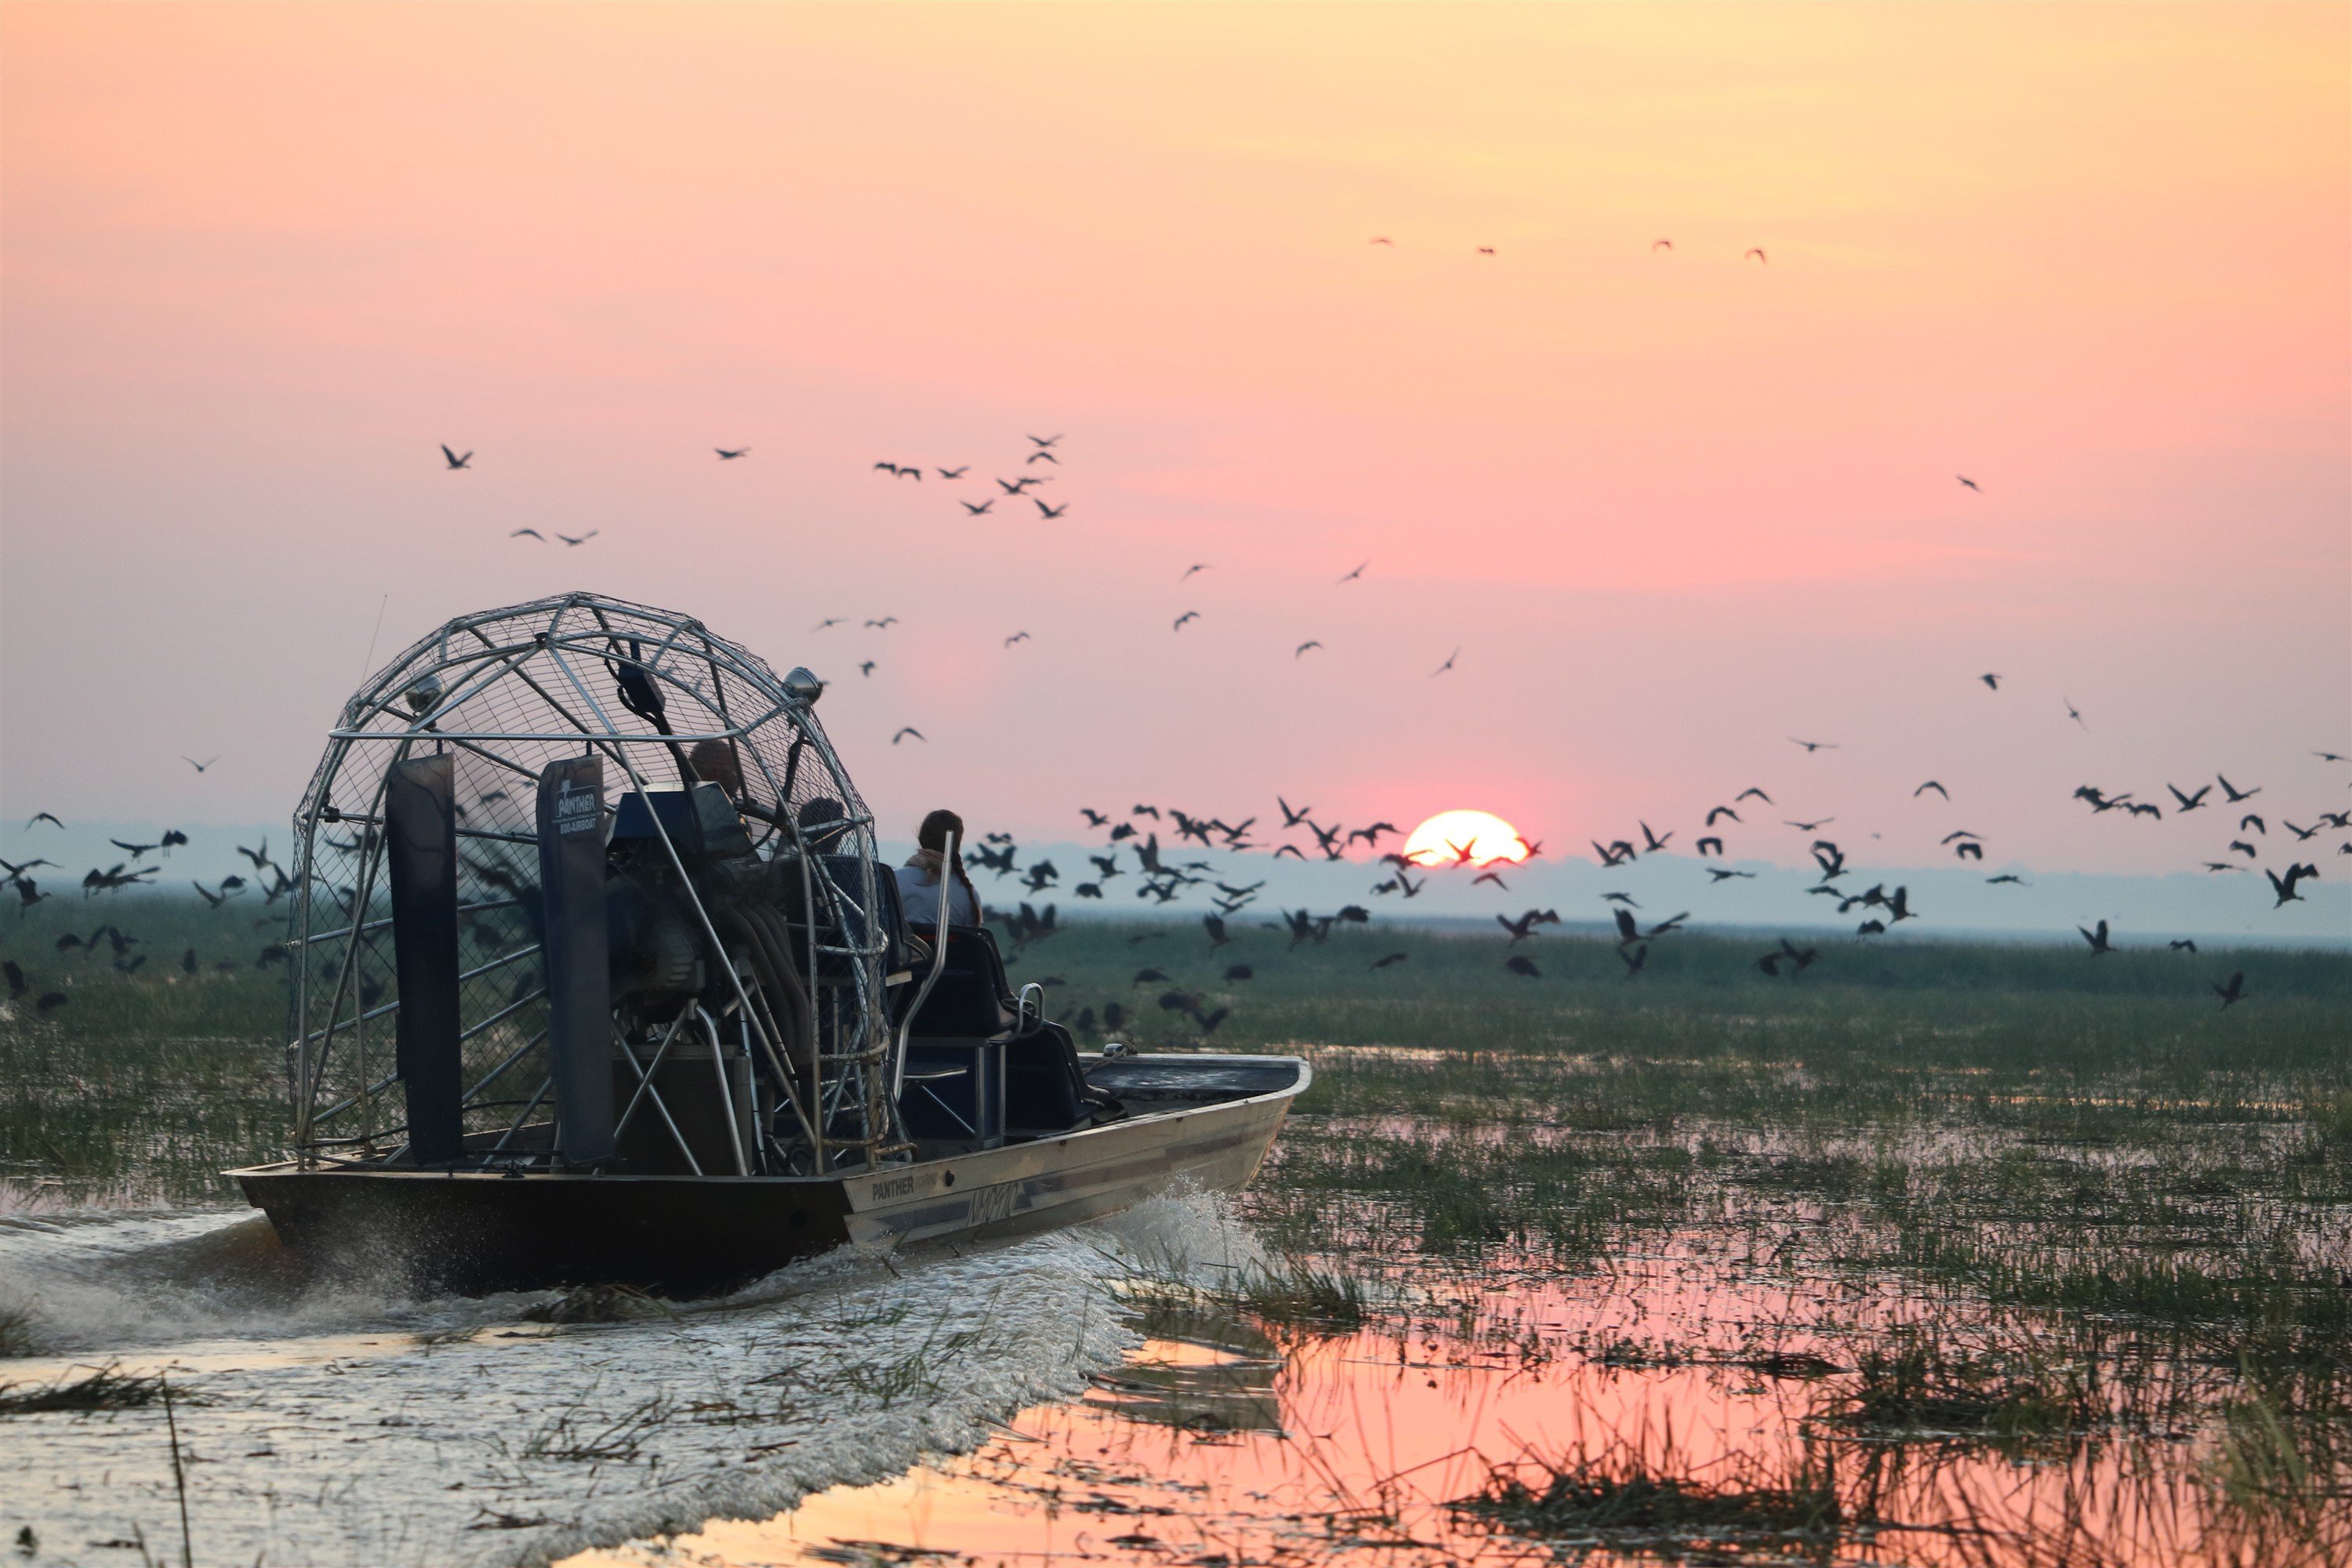 Bamurru Plains in Australia’s Northern Territory offers guests the opportunity to explore the wetlands of the Mary River on an air boat safari, complete with crocodiles and striking magpie geese. Picture: Emma Pritchett